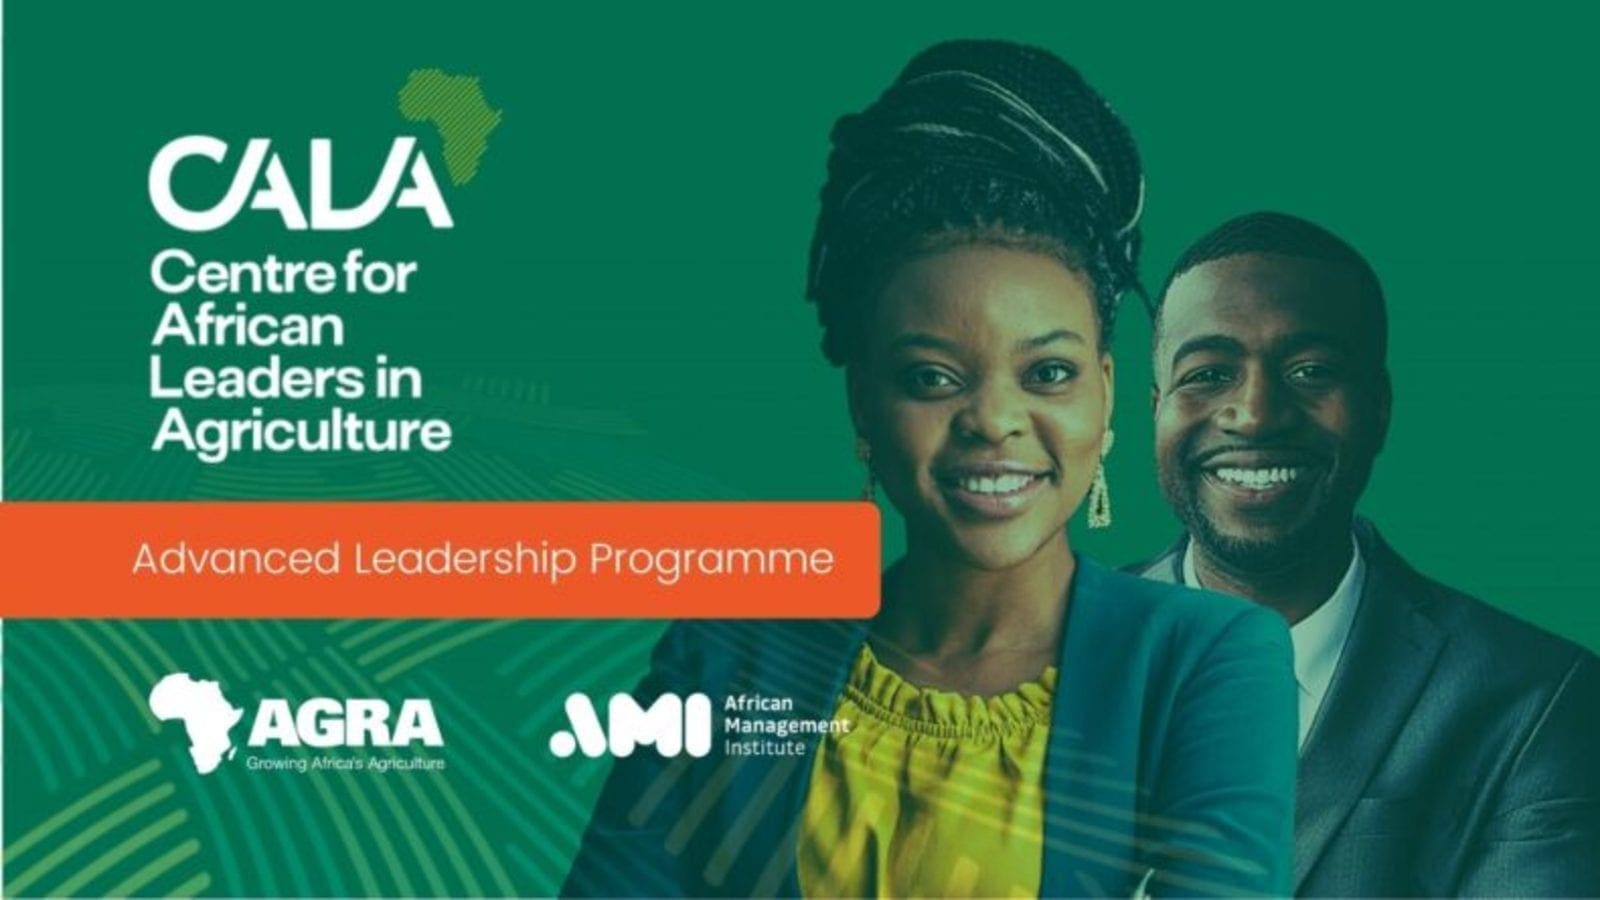 AGRA unveils new center to train Africa’s agriculture leaders in sustainable practices